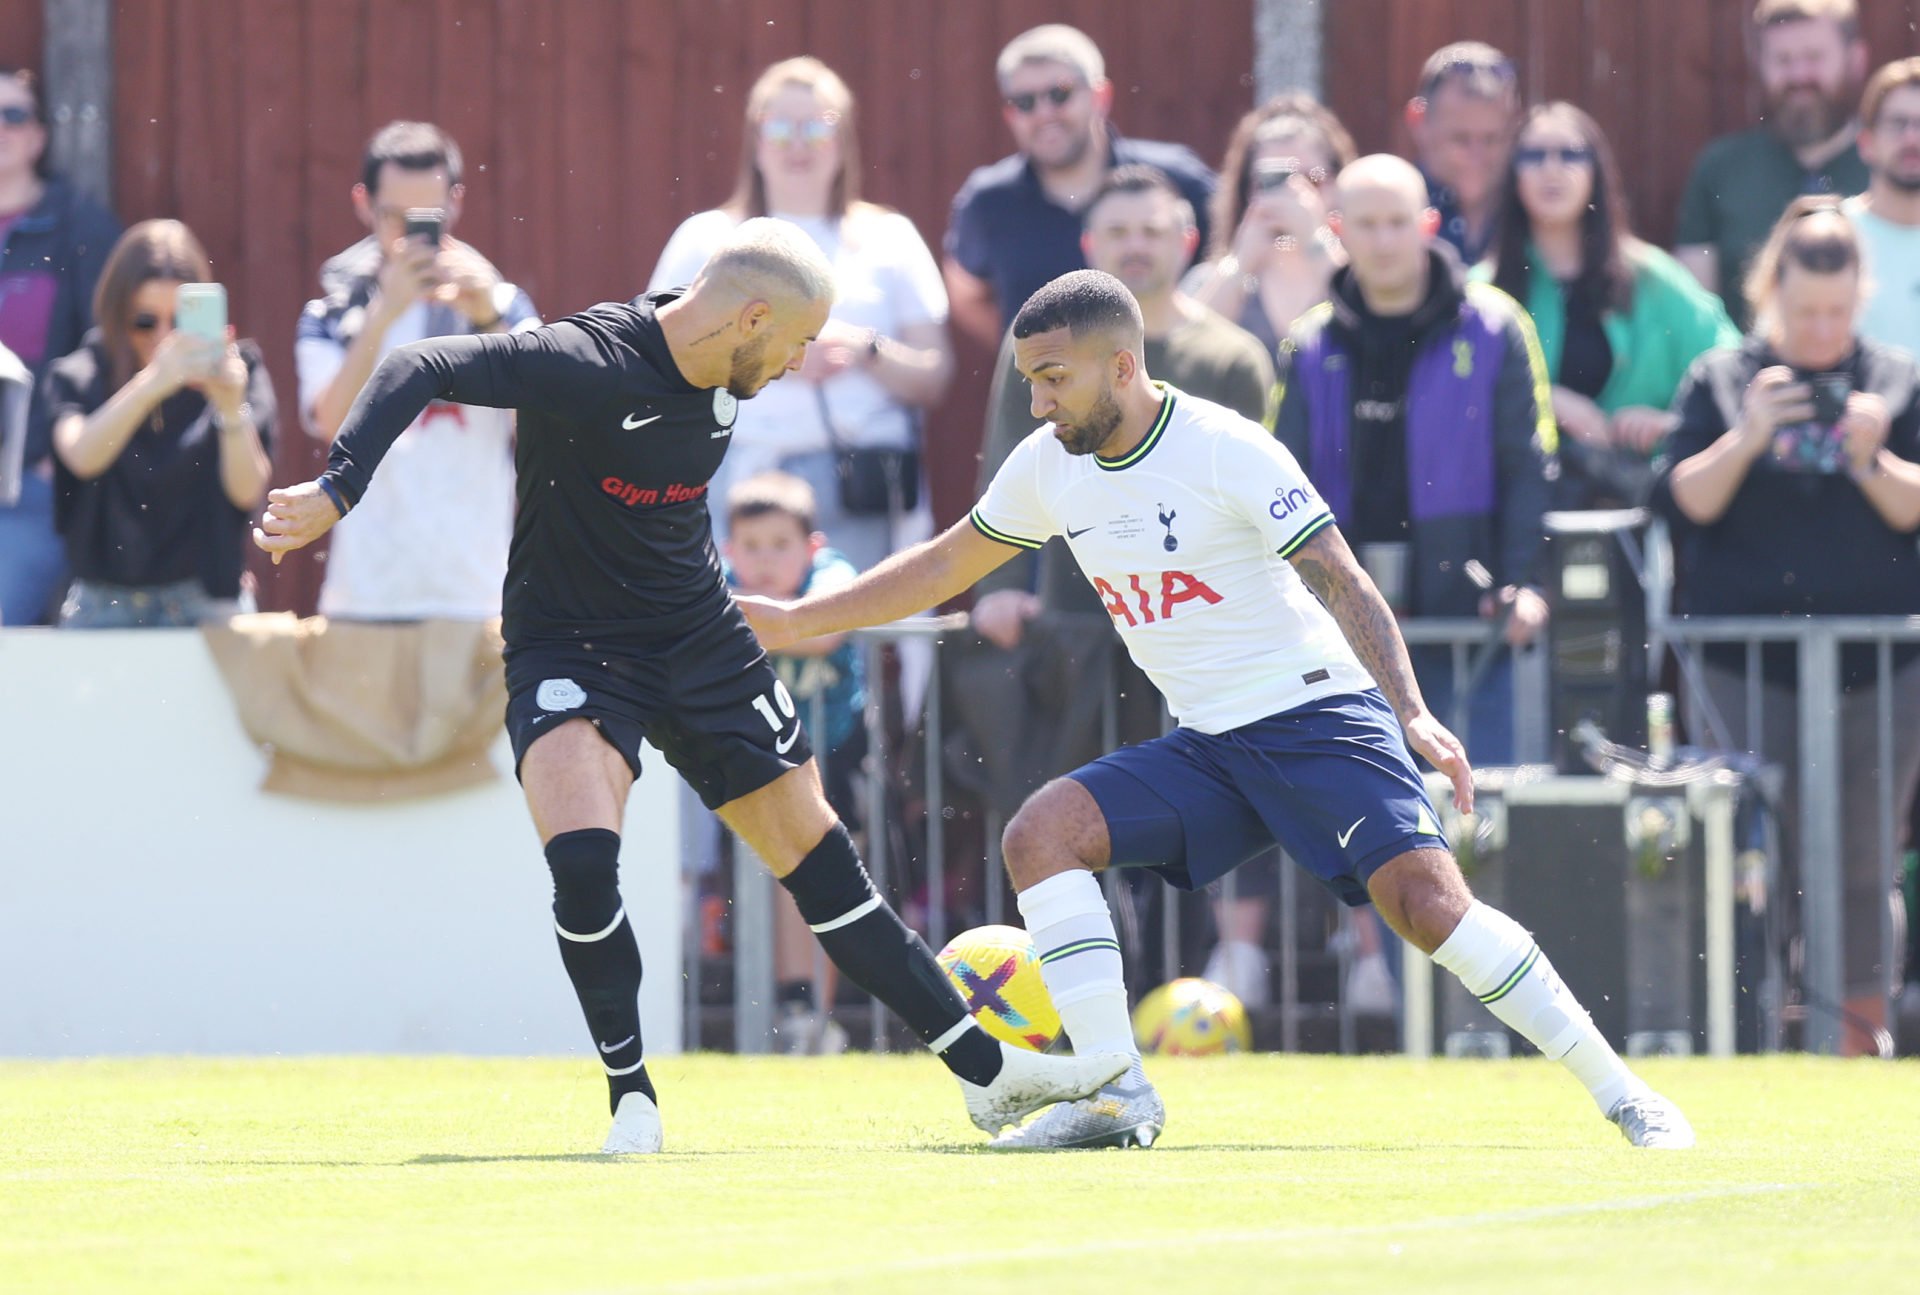  Former Tottenham Hotspur player Aaron Lennon takes the ball past an opposition player during a charity match.